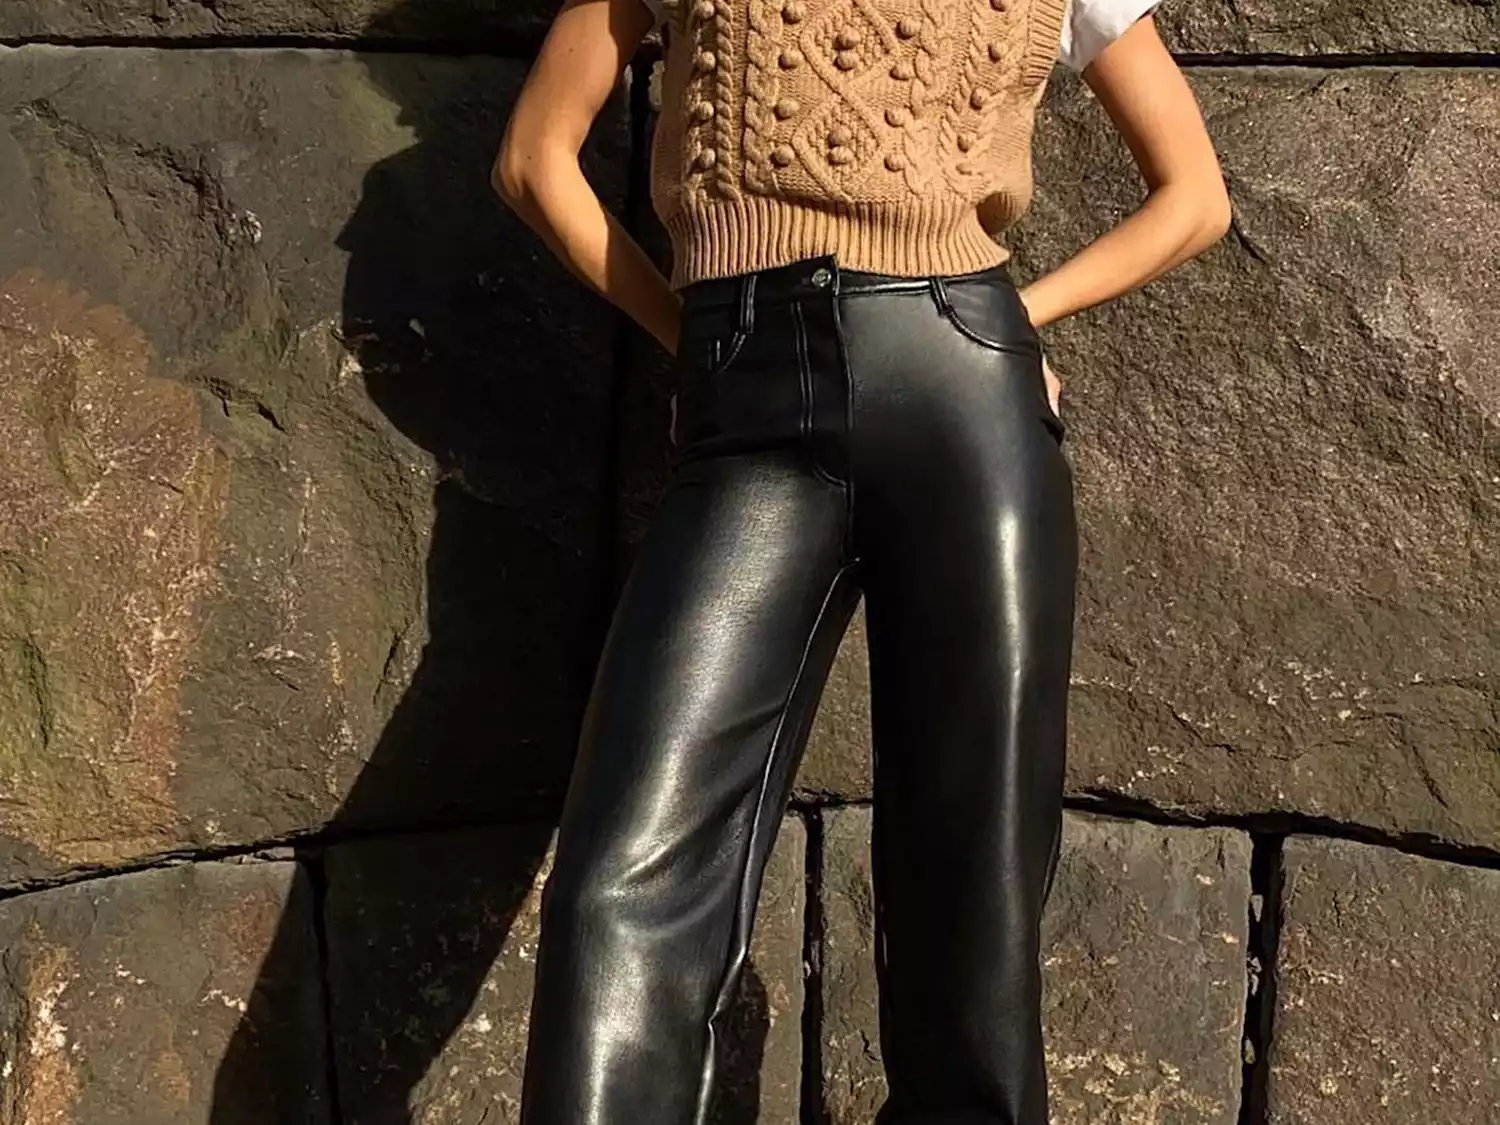 Woman wears black leather pants and a taupe sweater vest against a stone wall